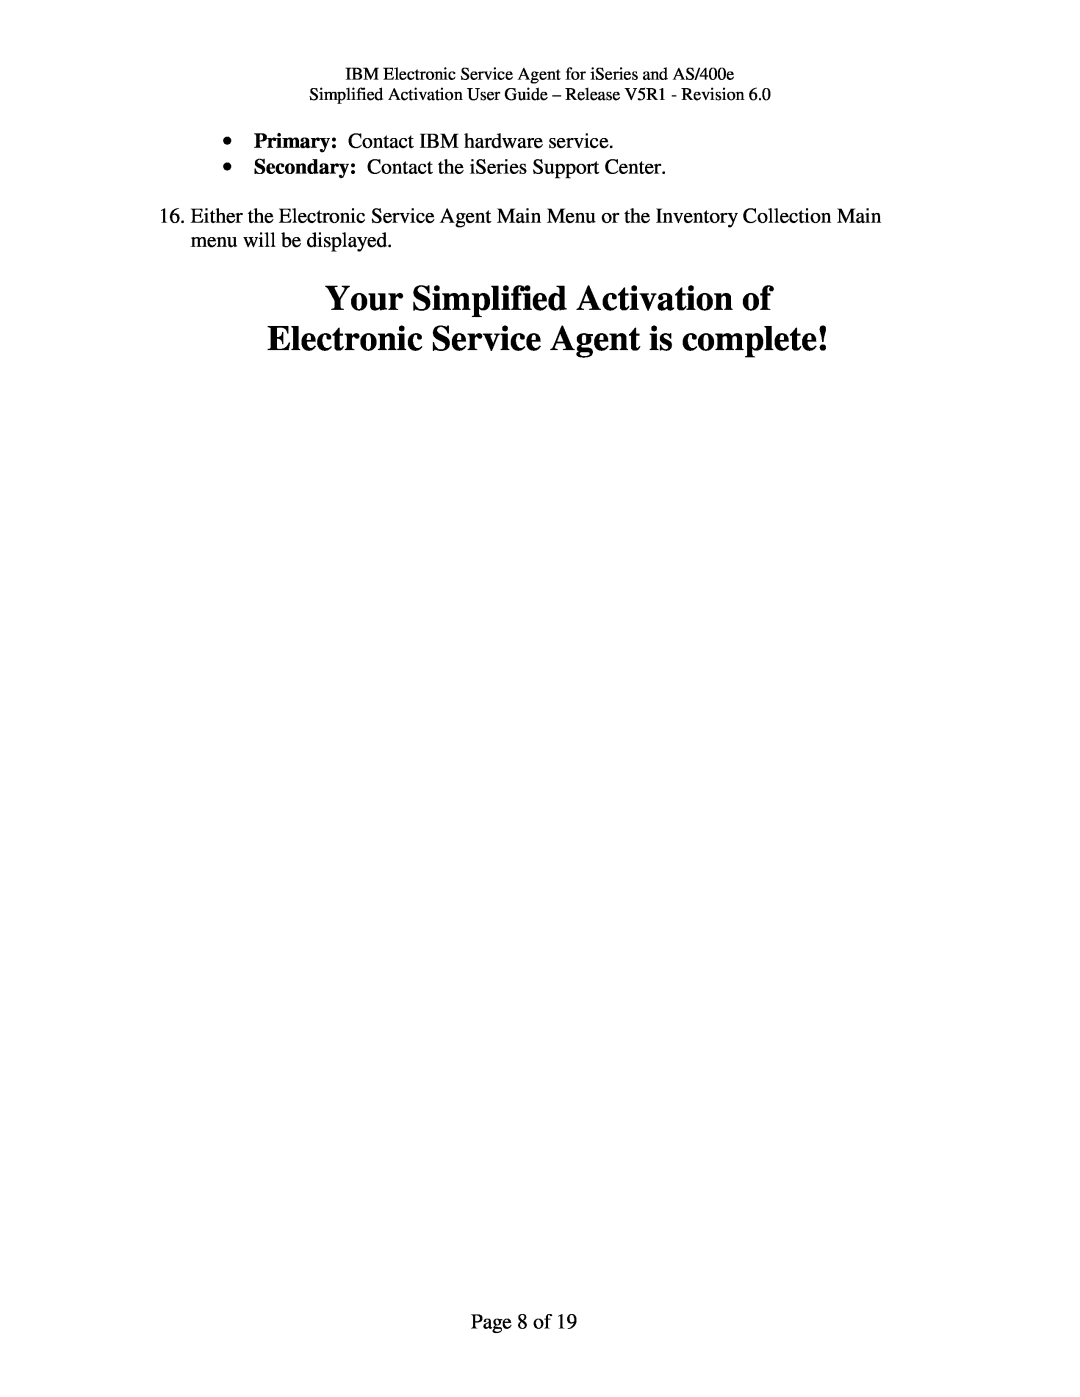 IBM PTF SF67624, iSeries, V5R1 manual Your Simplified Activation of, Electronic Service Agent is complete, Page 8 of 